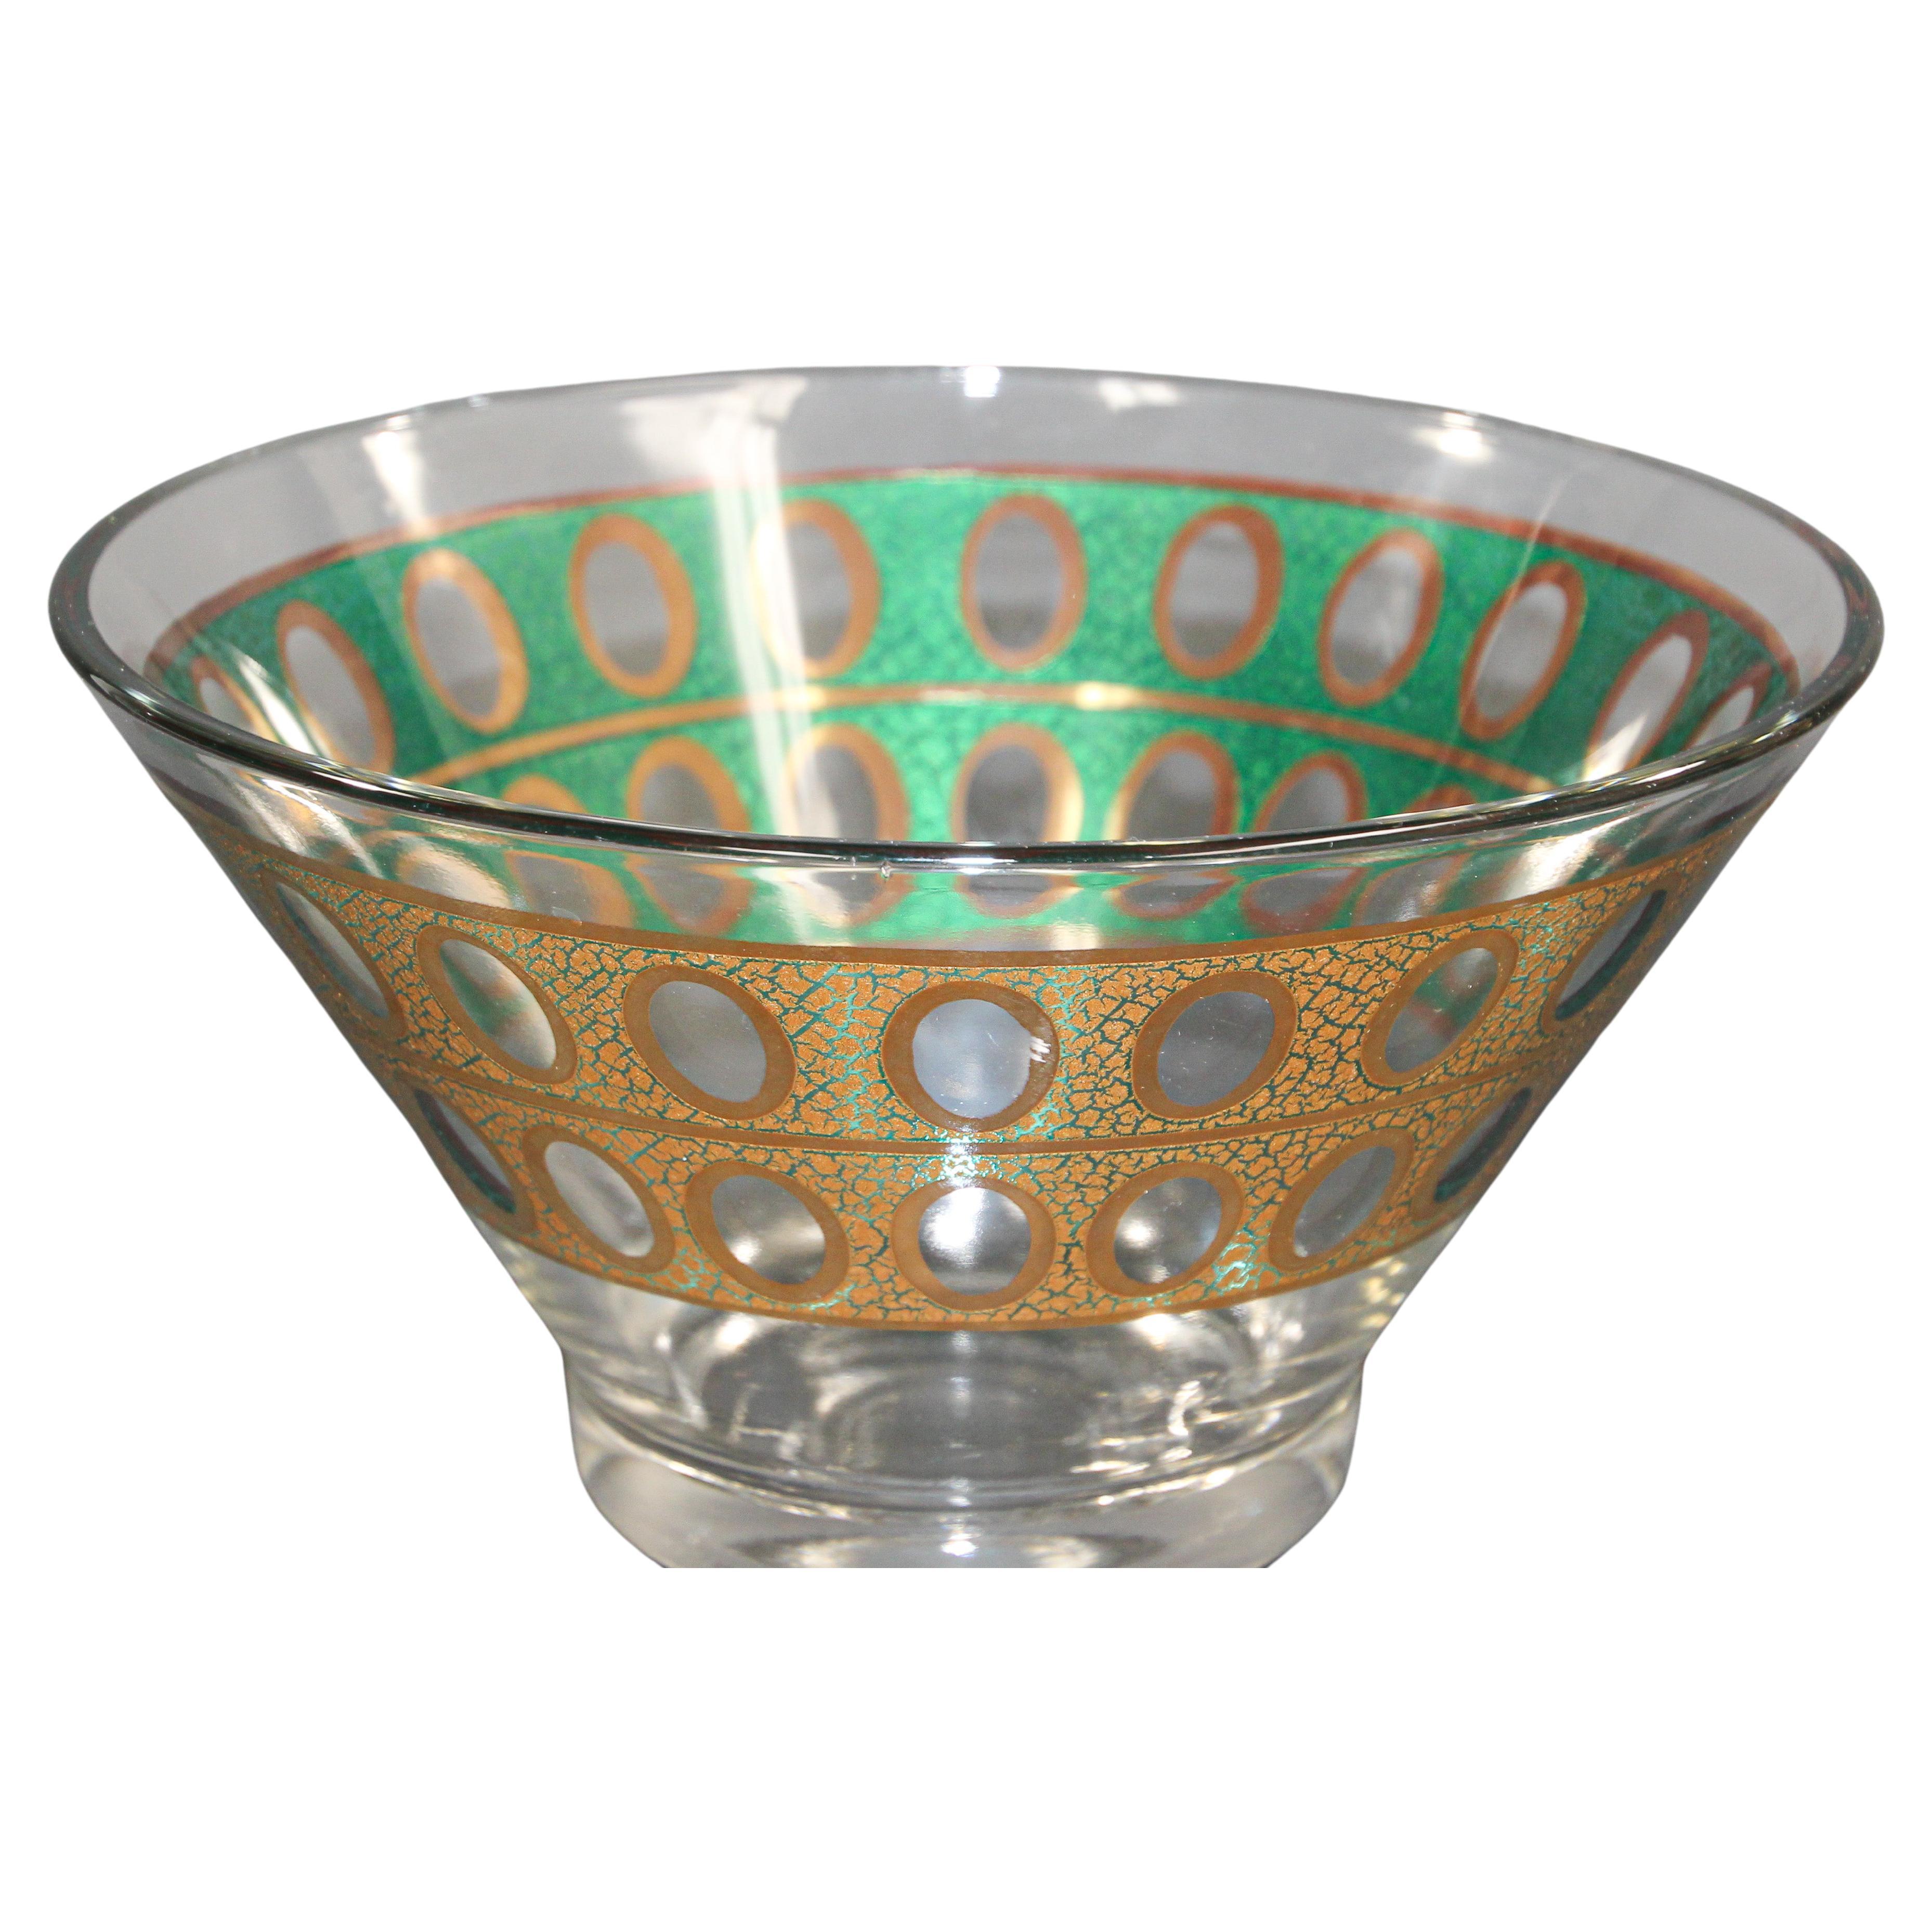 Vintage midcentury green and gold Antigua punch bowl or ice bucket designed by Culver.
22-karat gold culver Antigua themed vintage ice bow , circa 1960.
The ice bowl shows no wear and is in great condition.
Antigua pattern has bands of 22k gold